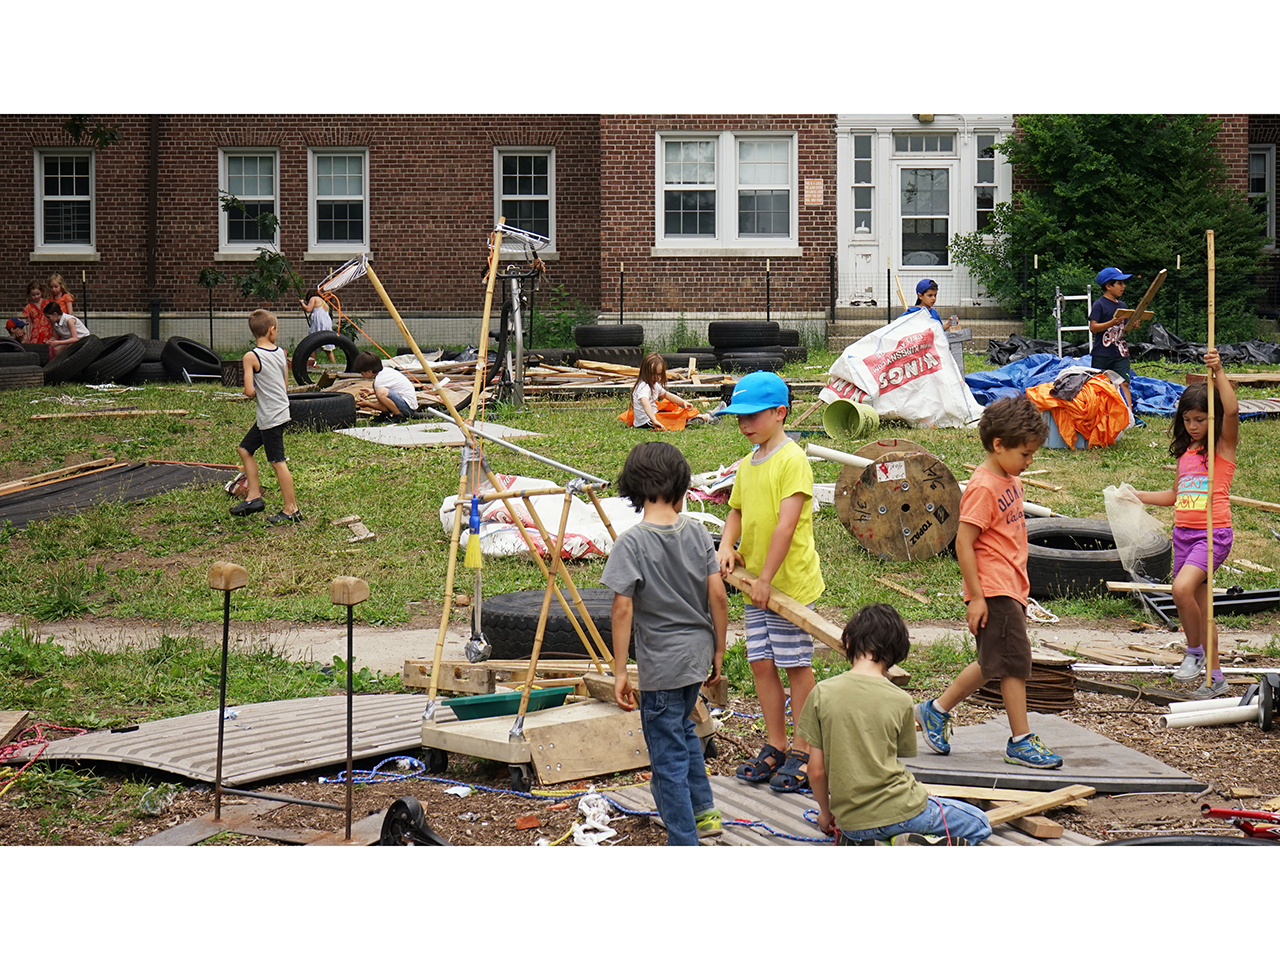 Kids playing at Play:ground on Governors Island